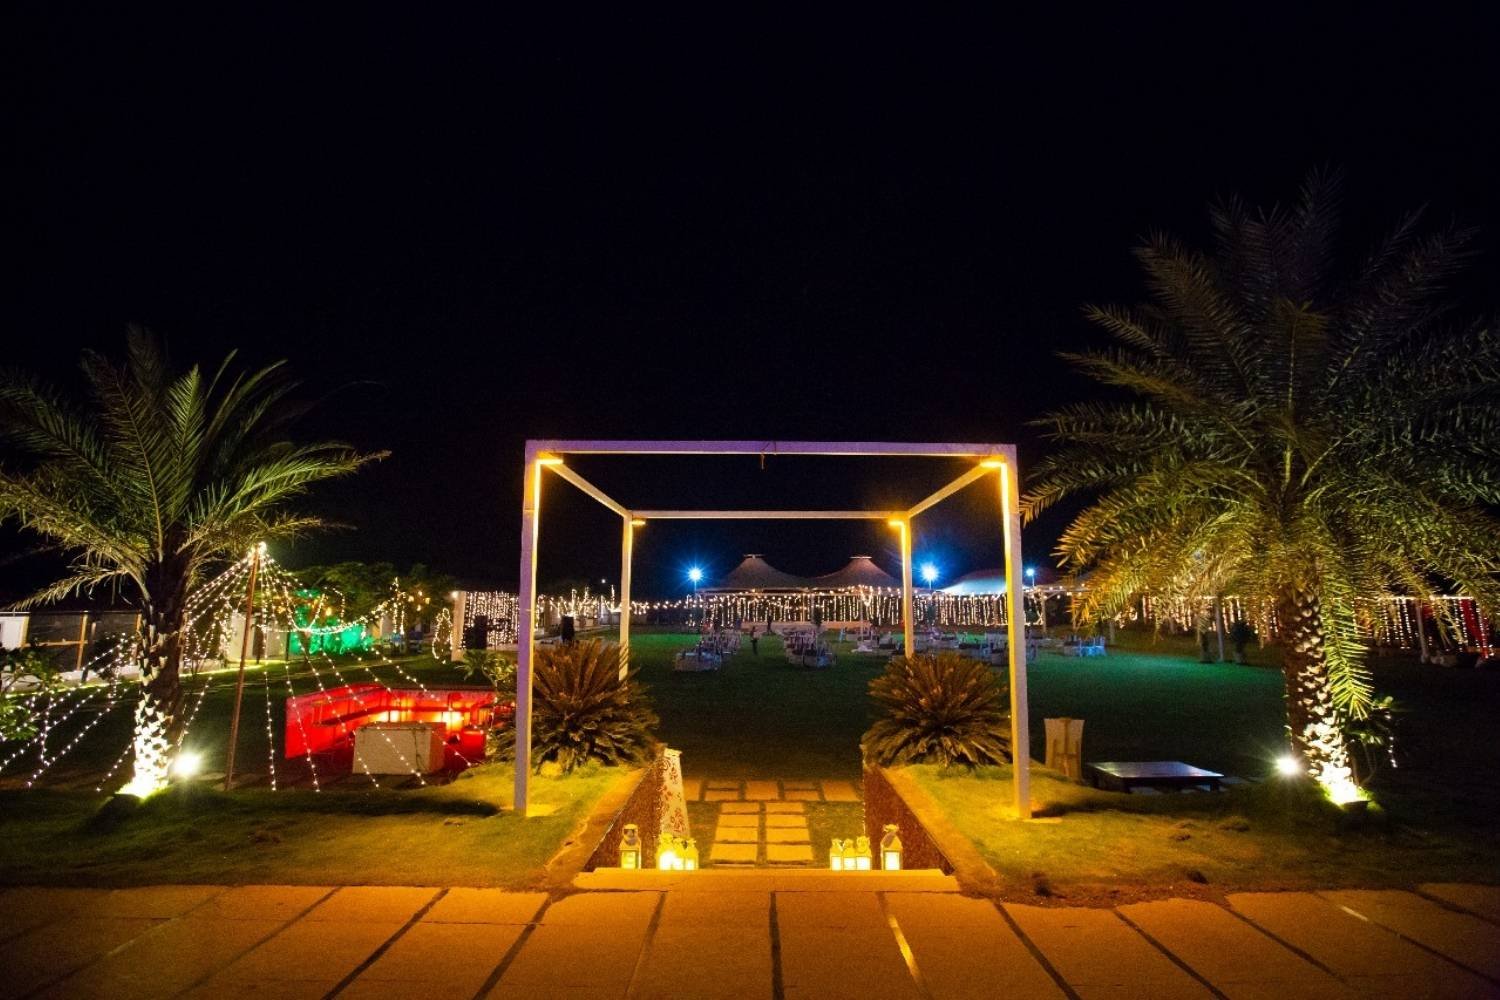 Night weddings at open-air wedding venues in Bangalore